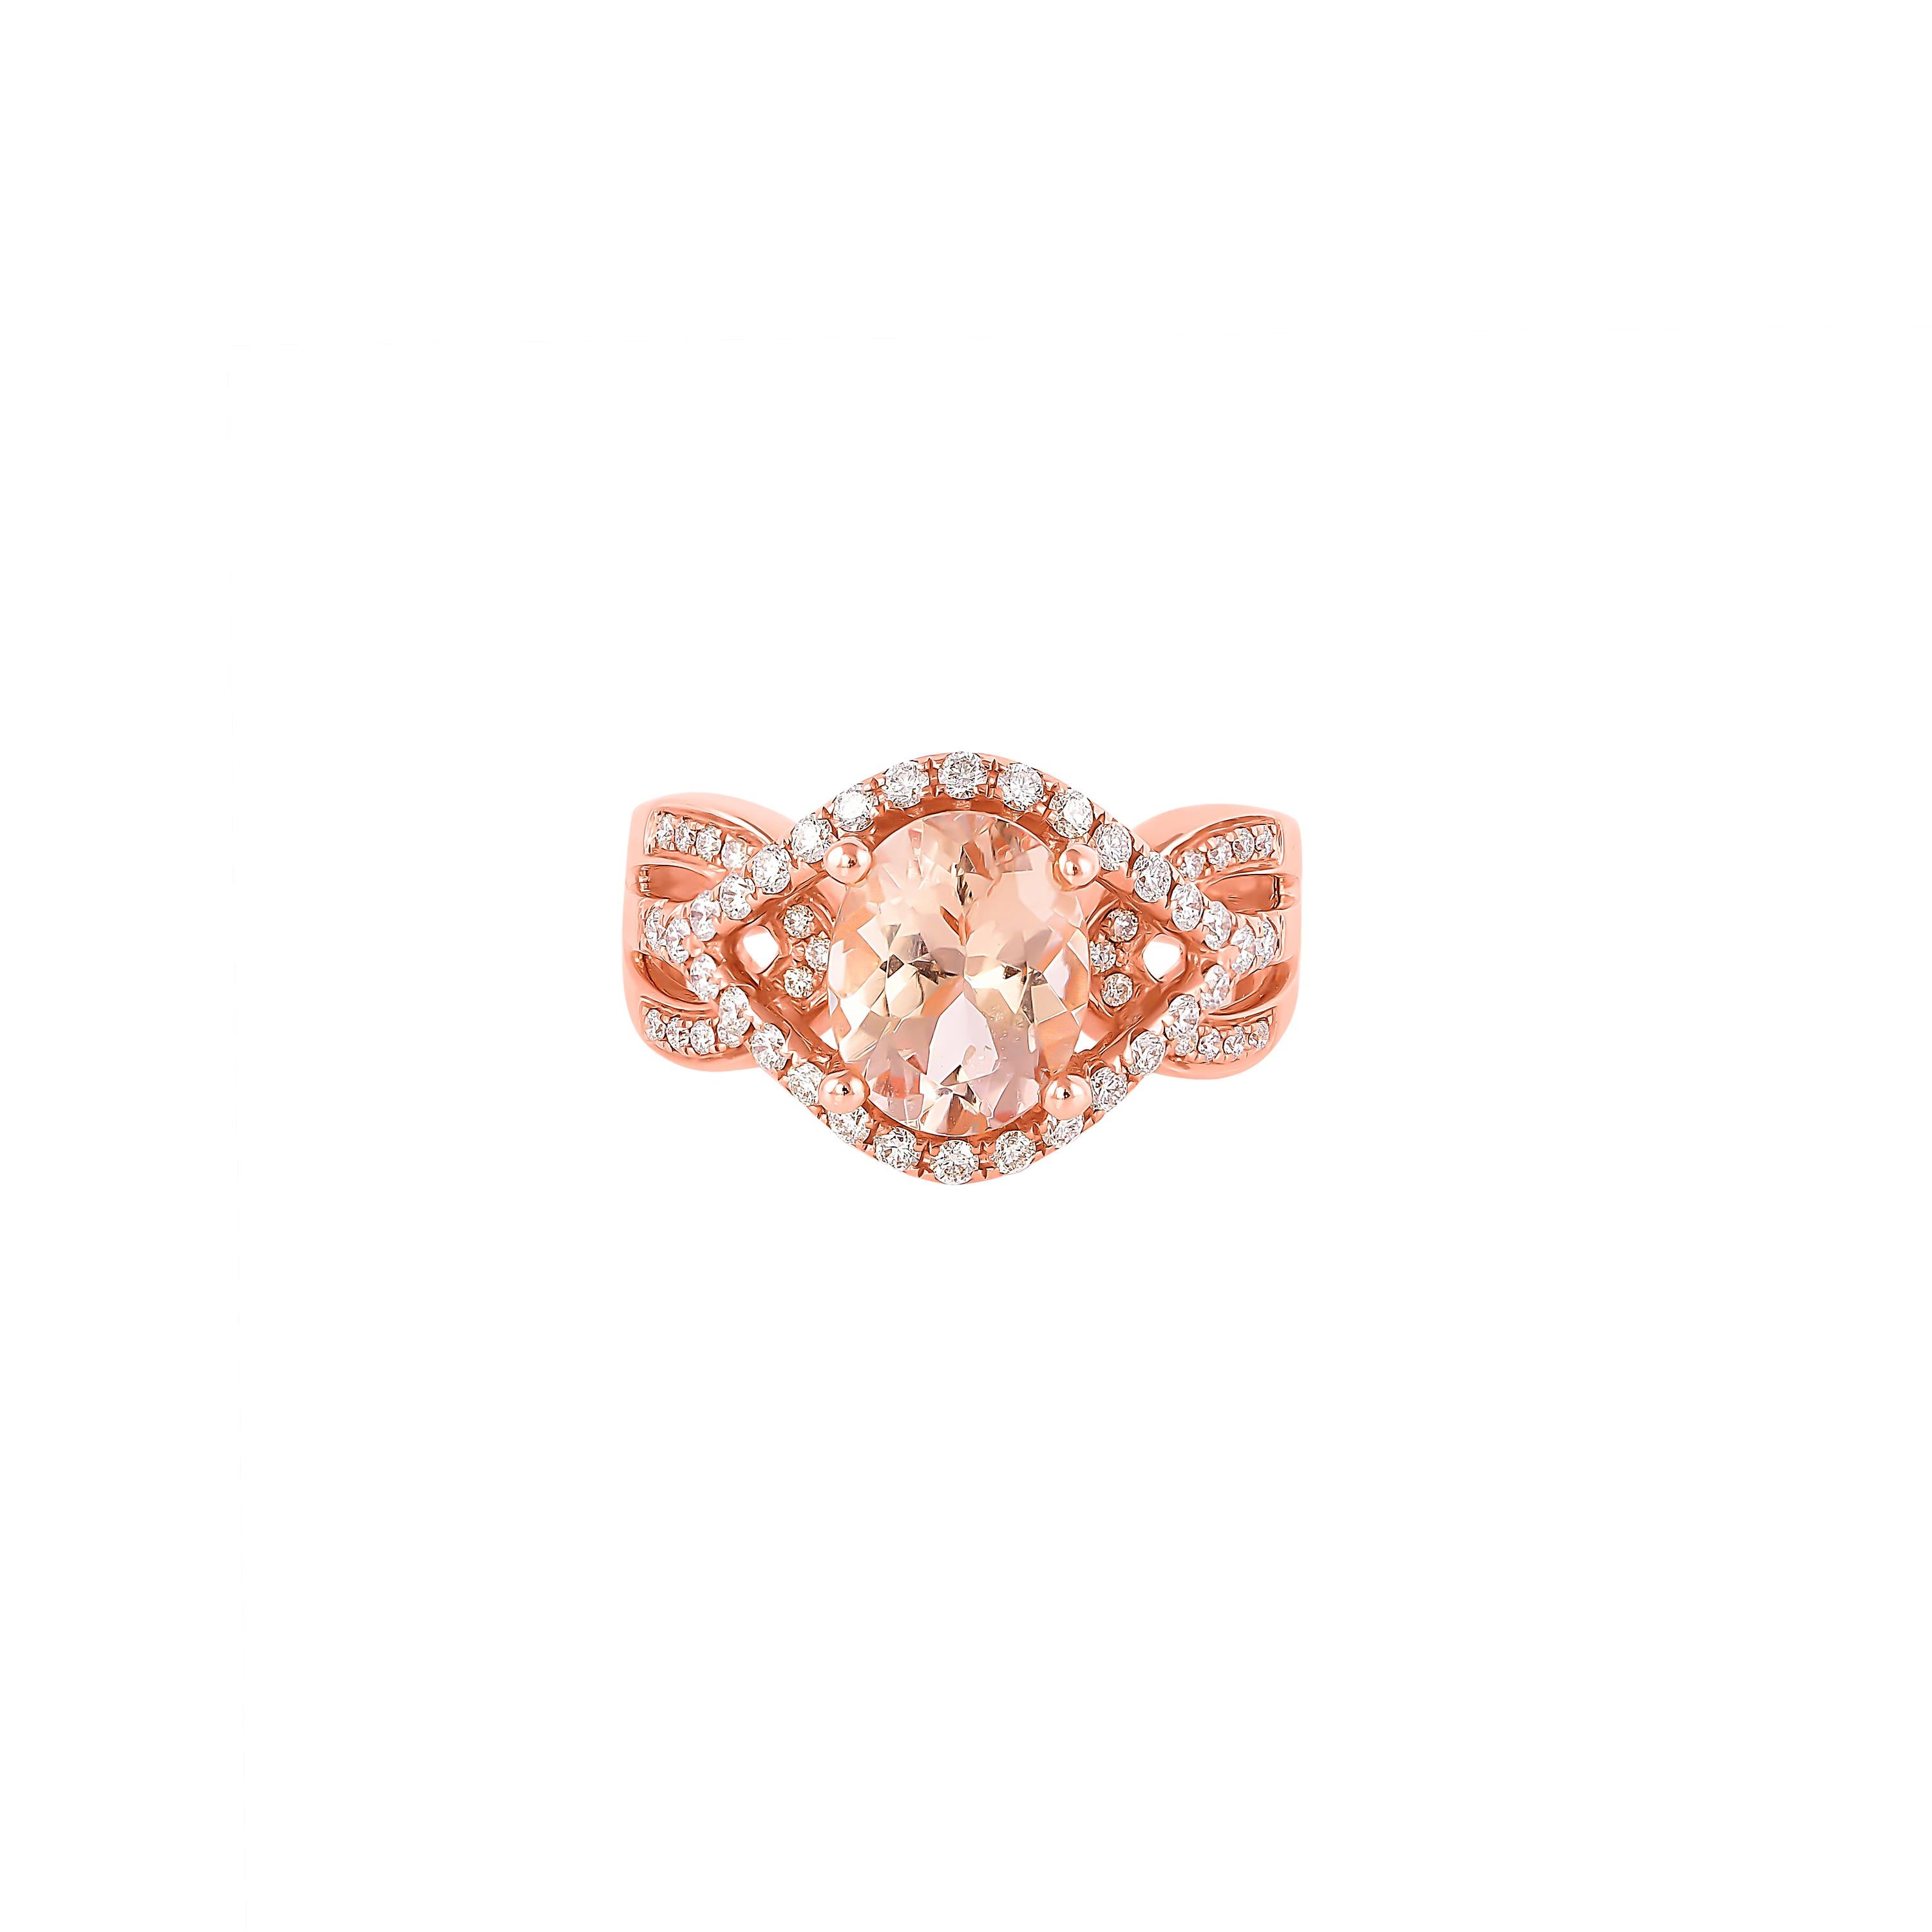 Contemporary 2.5 Carat Morganite and Diamond Ring in 18 Karat Rose Gold For Sale